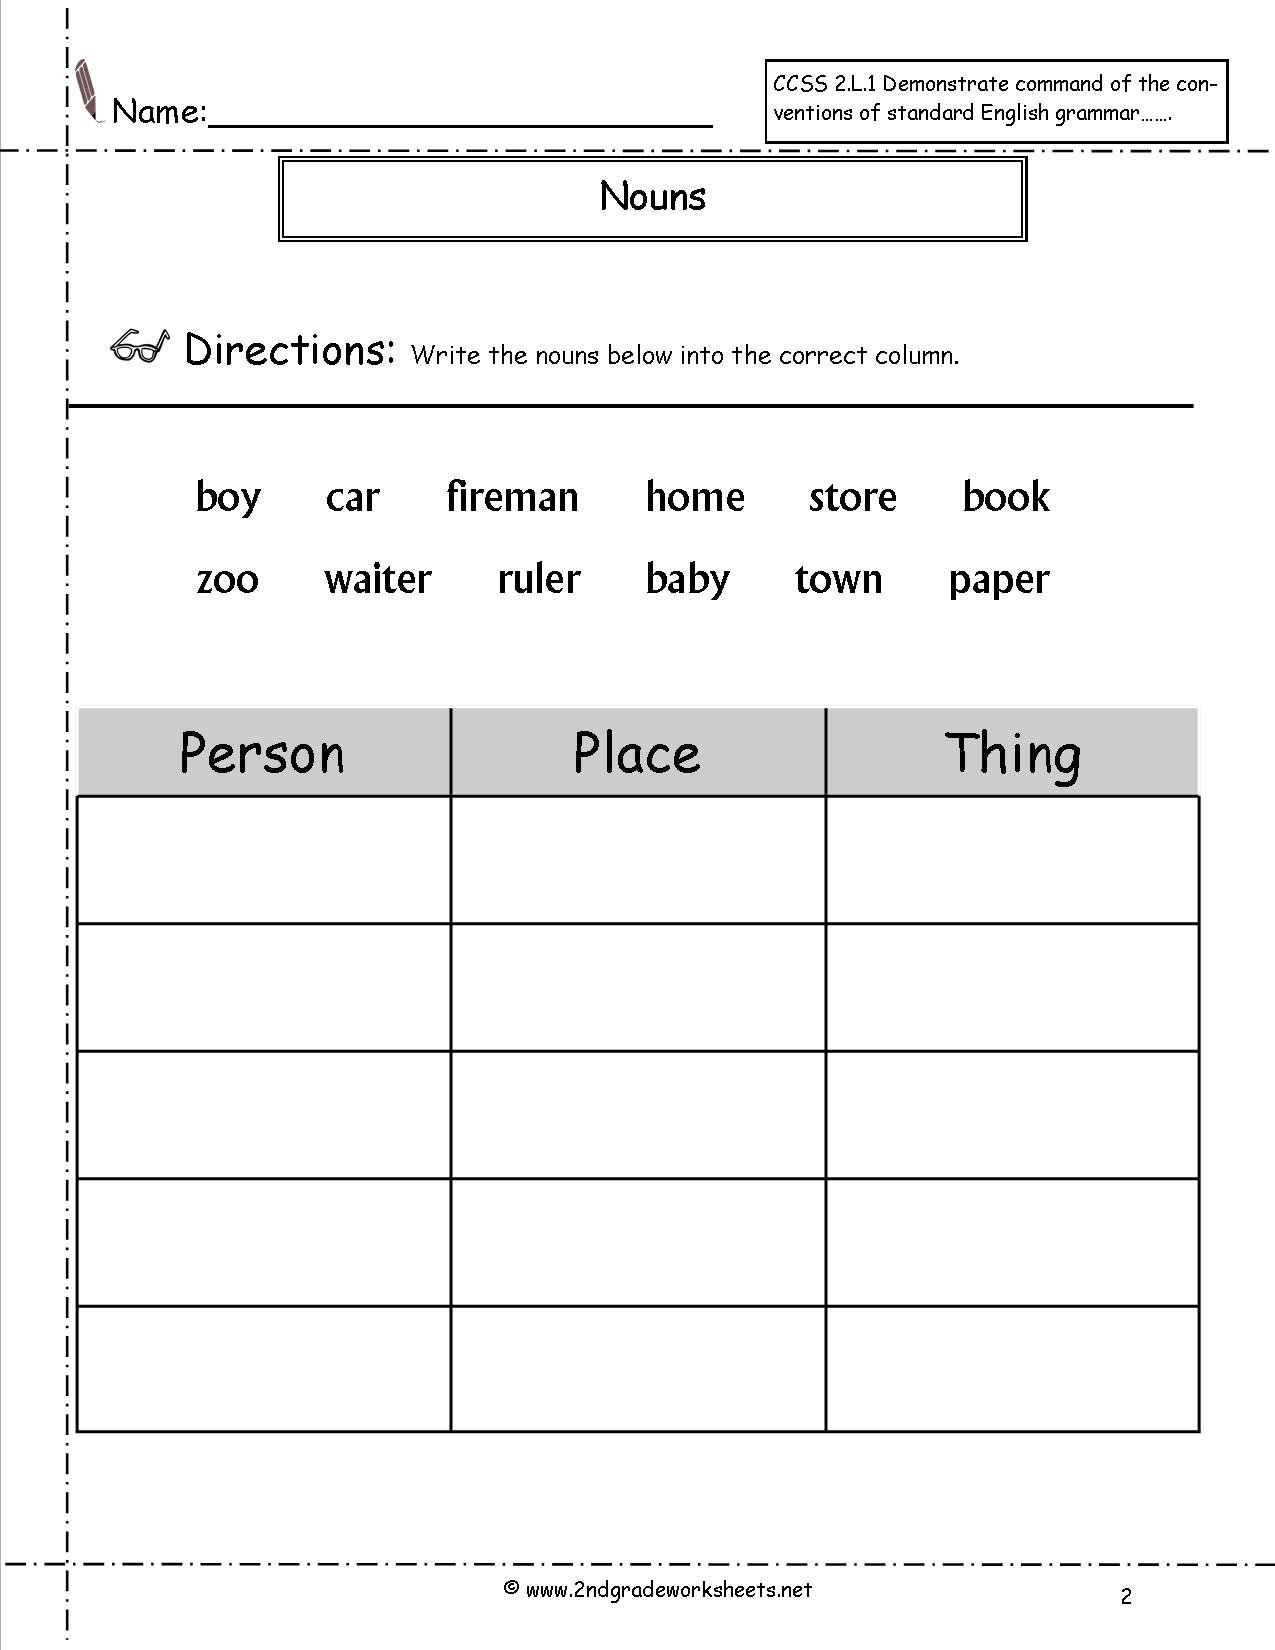 Nouns Worksheets And Printouts Intended For Nouns Worksheet 2Nd Grade